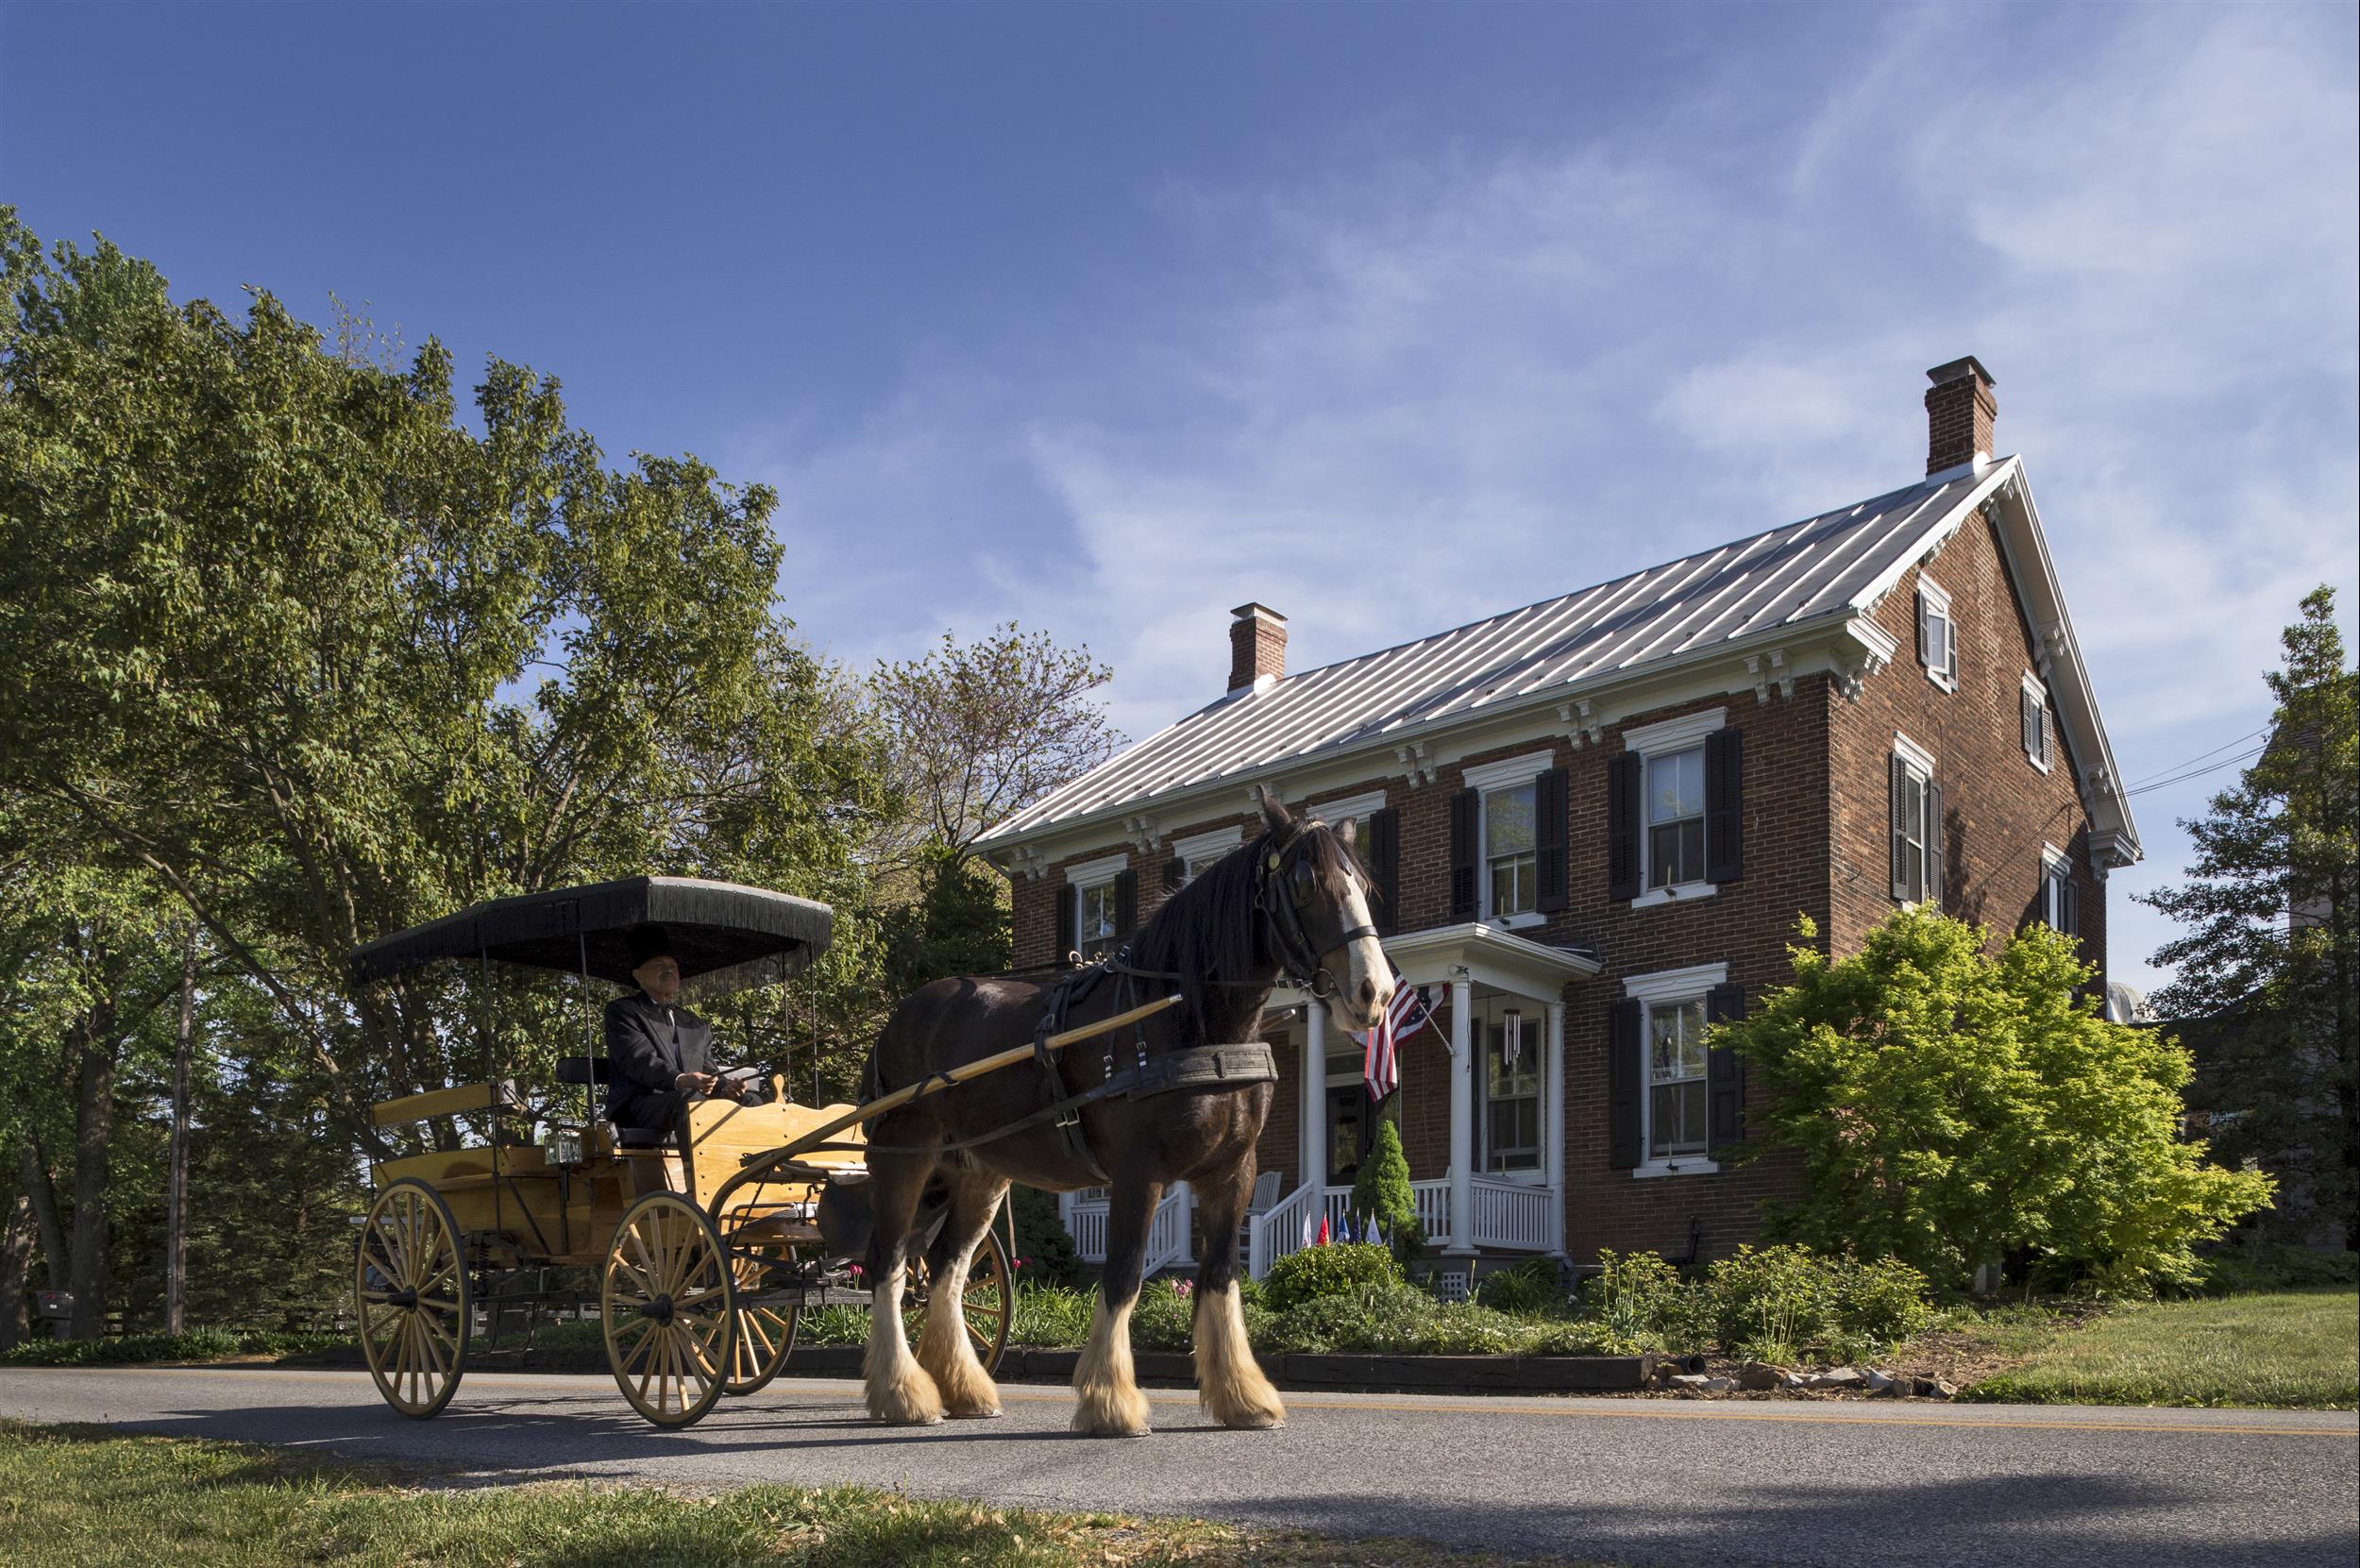 man-driving-horse-drawn-carriage-in-front-of-Inn.jpg